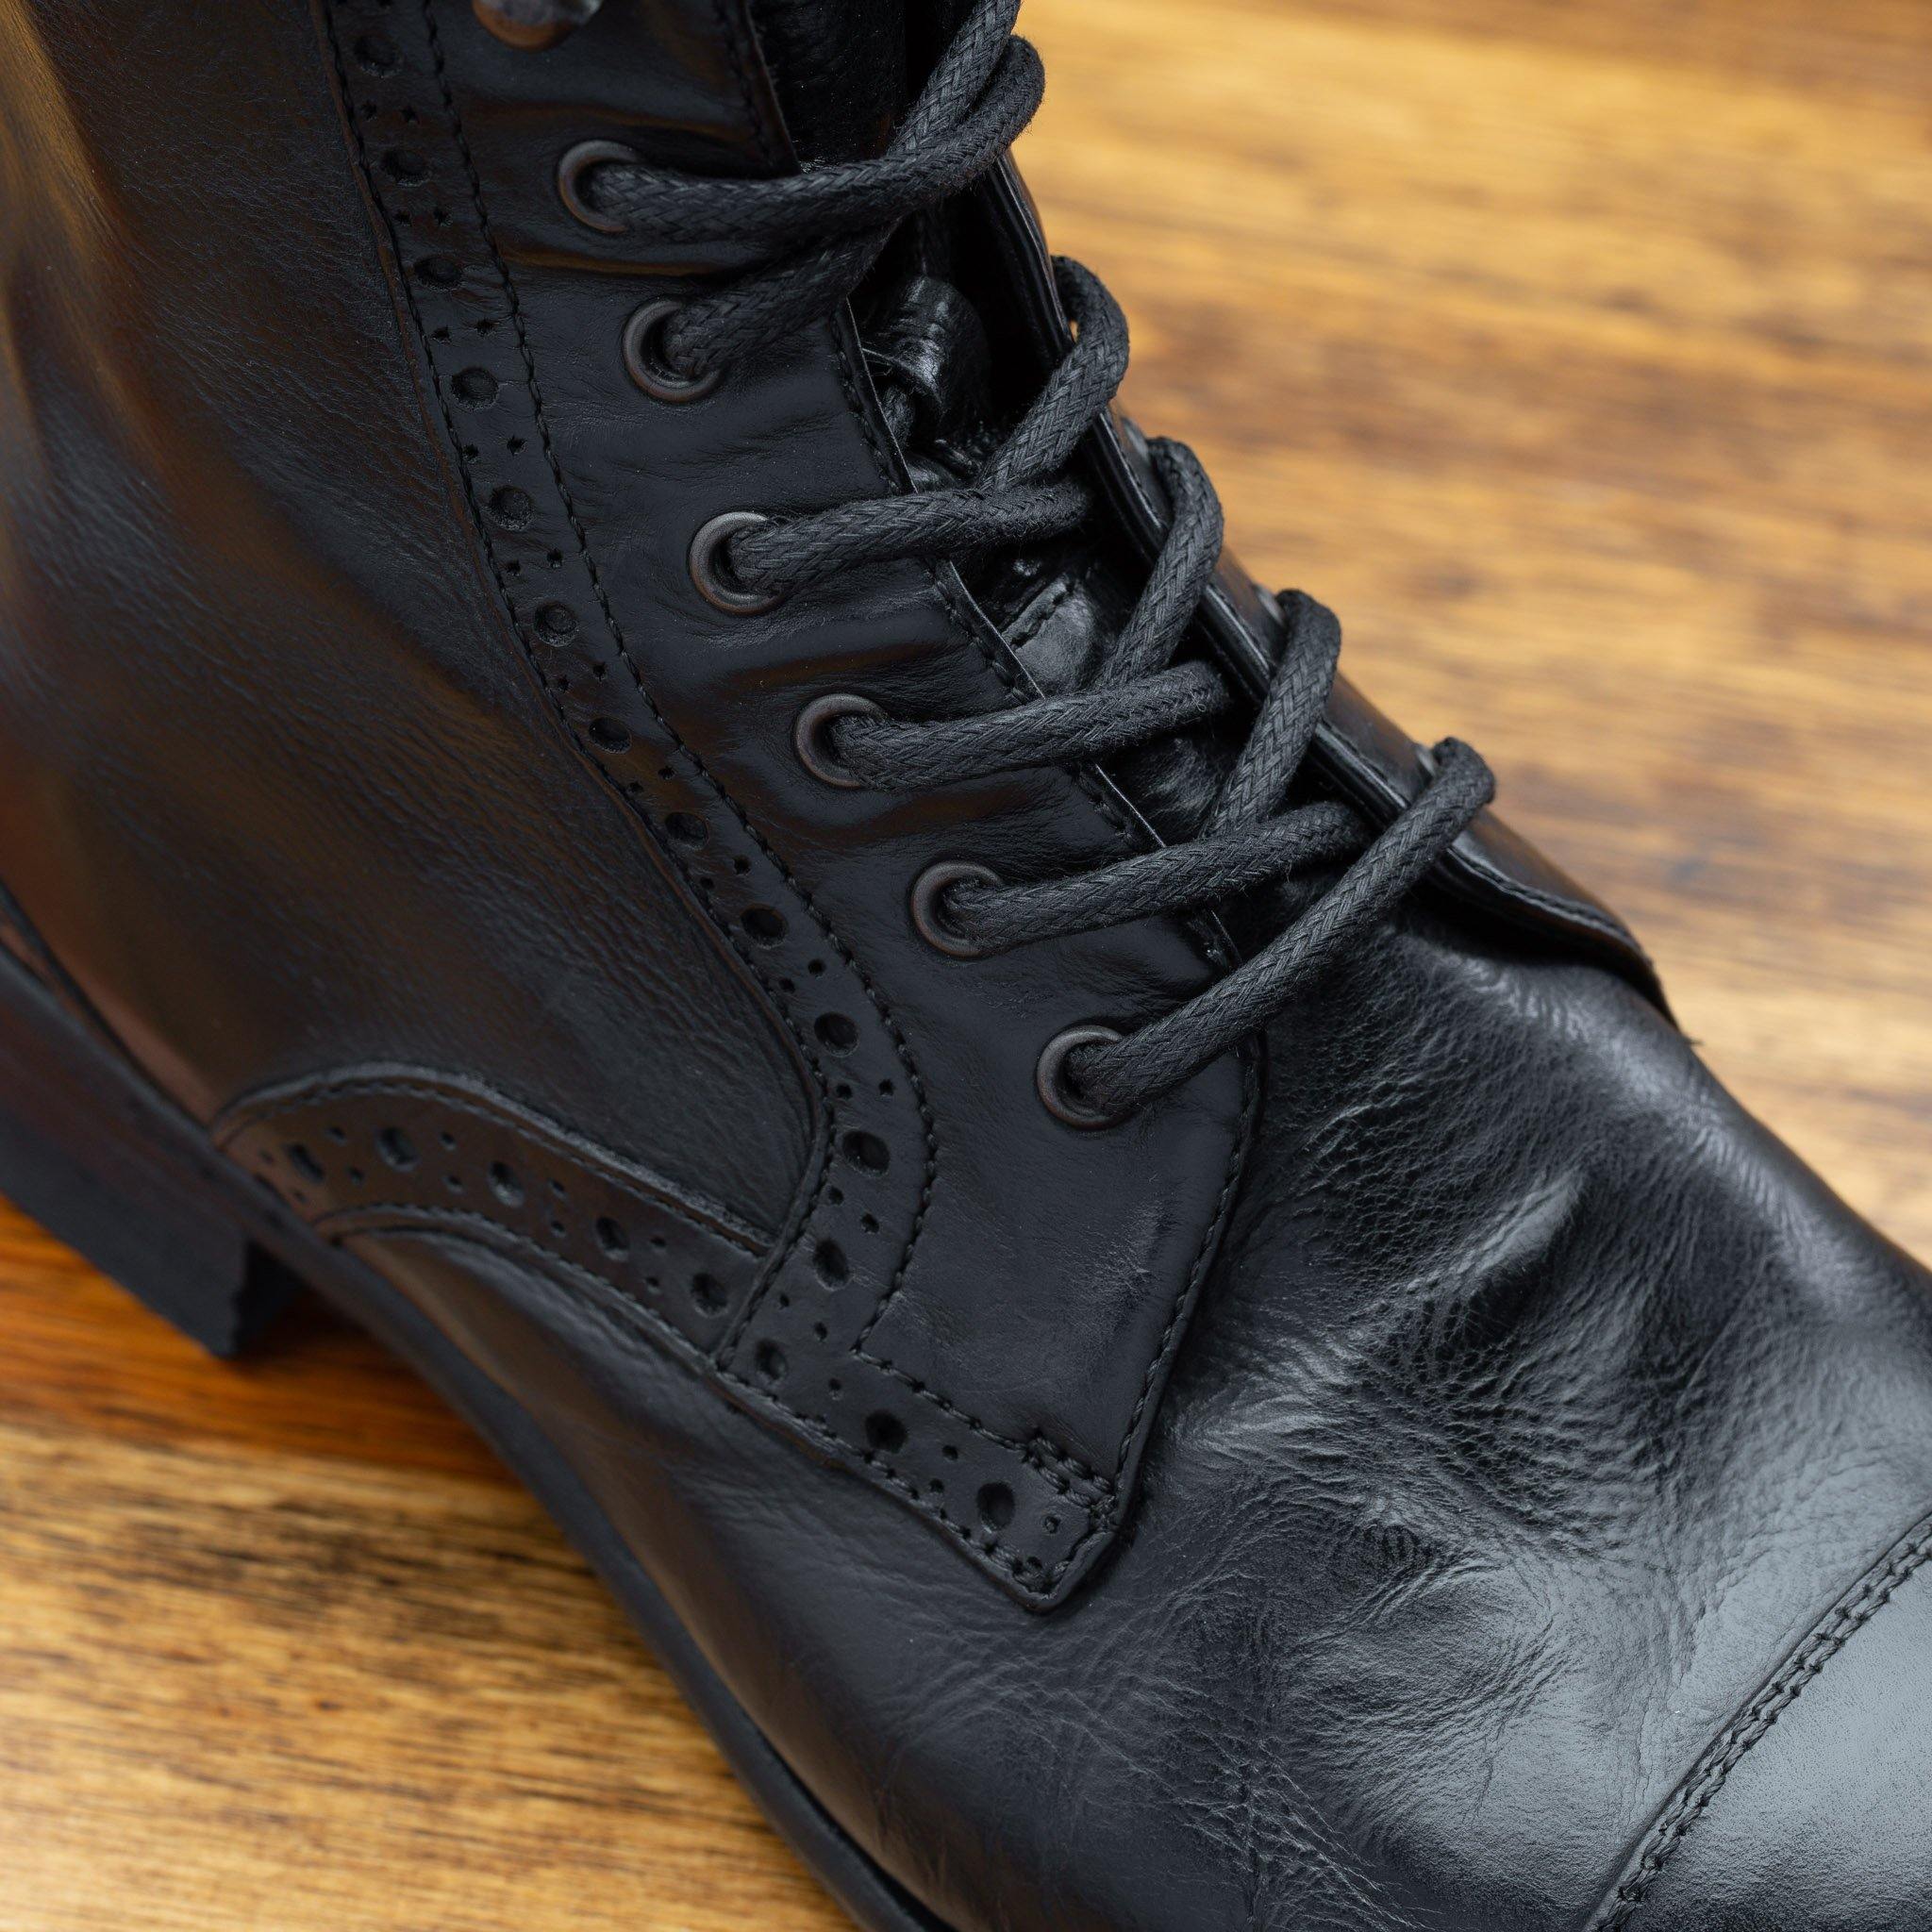 Up close picture of the 6 eyelet of 7149 Calzoleria Toscana Women's Black Dip-Dyed Diver Combat Boot